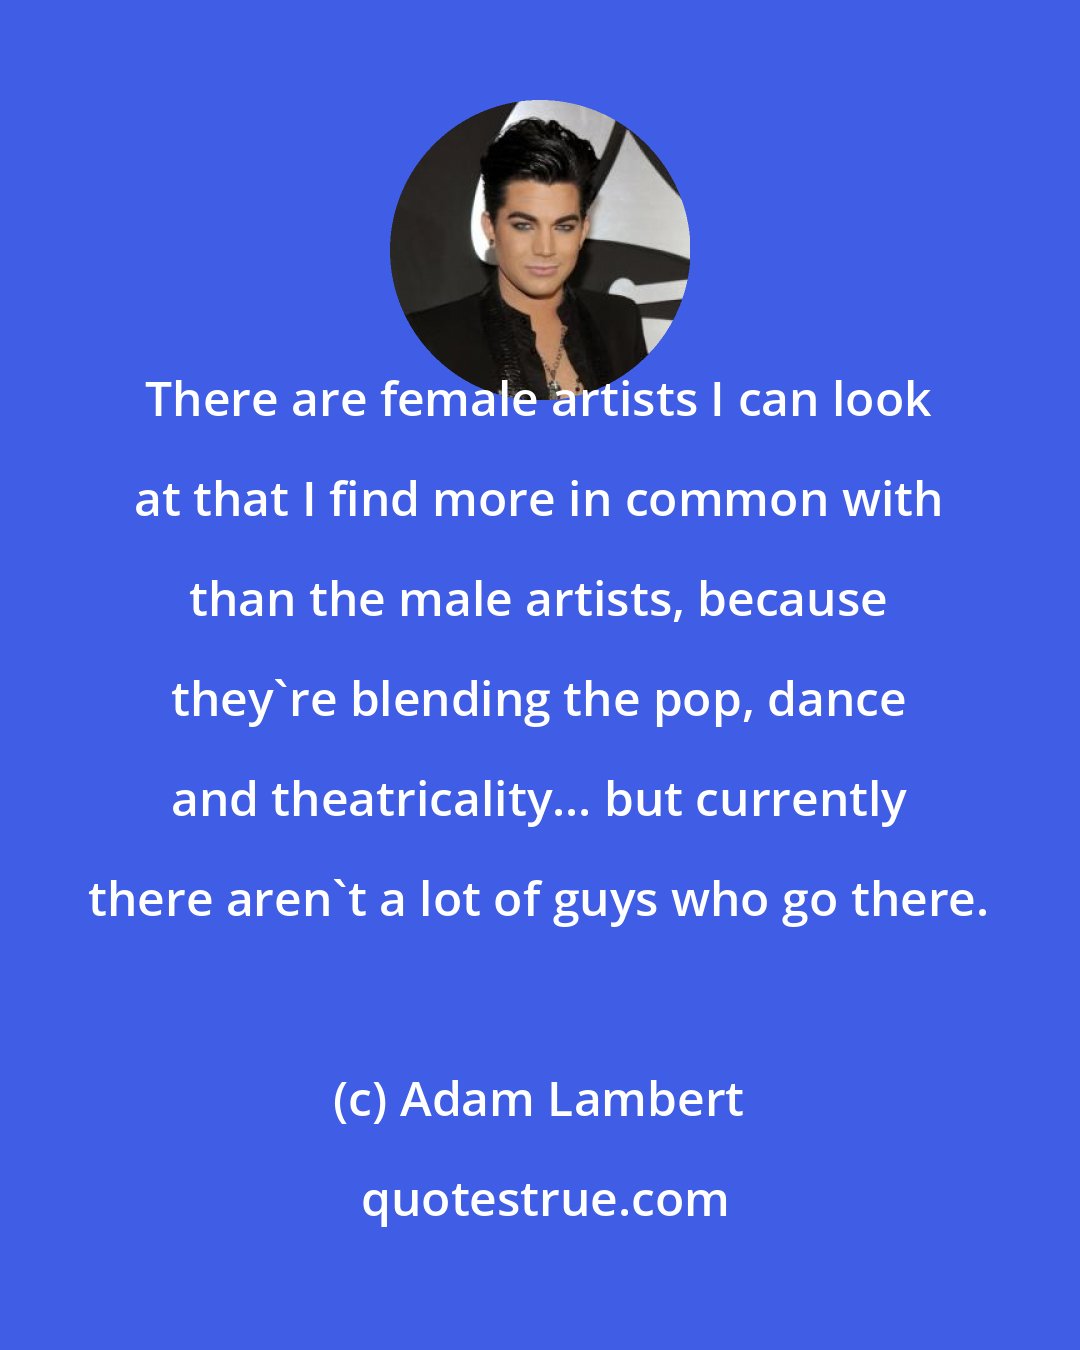 Adam Lambert: There are female artists I can look at that I find more in common with than the male artists, because they're blending the pop, dance and theatricality... but currently there aren't a lot of guys who go there.